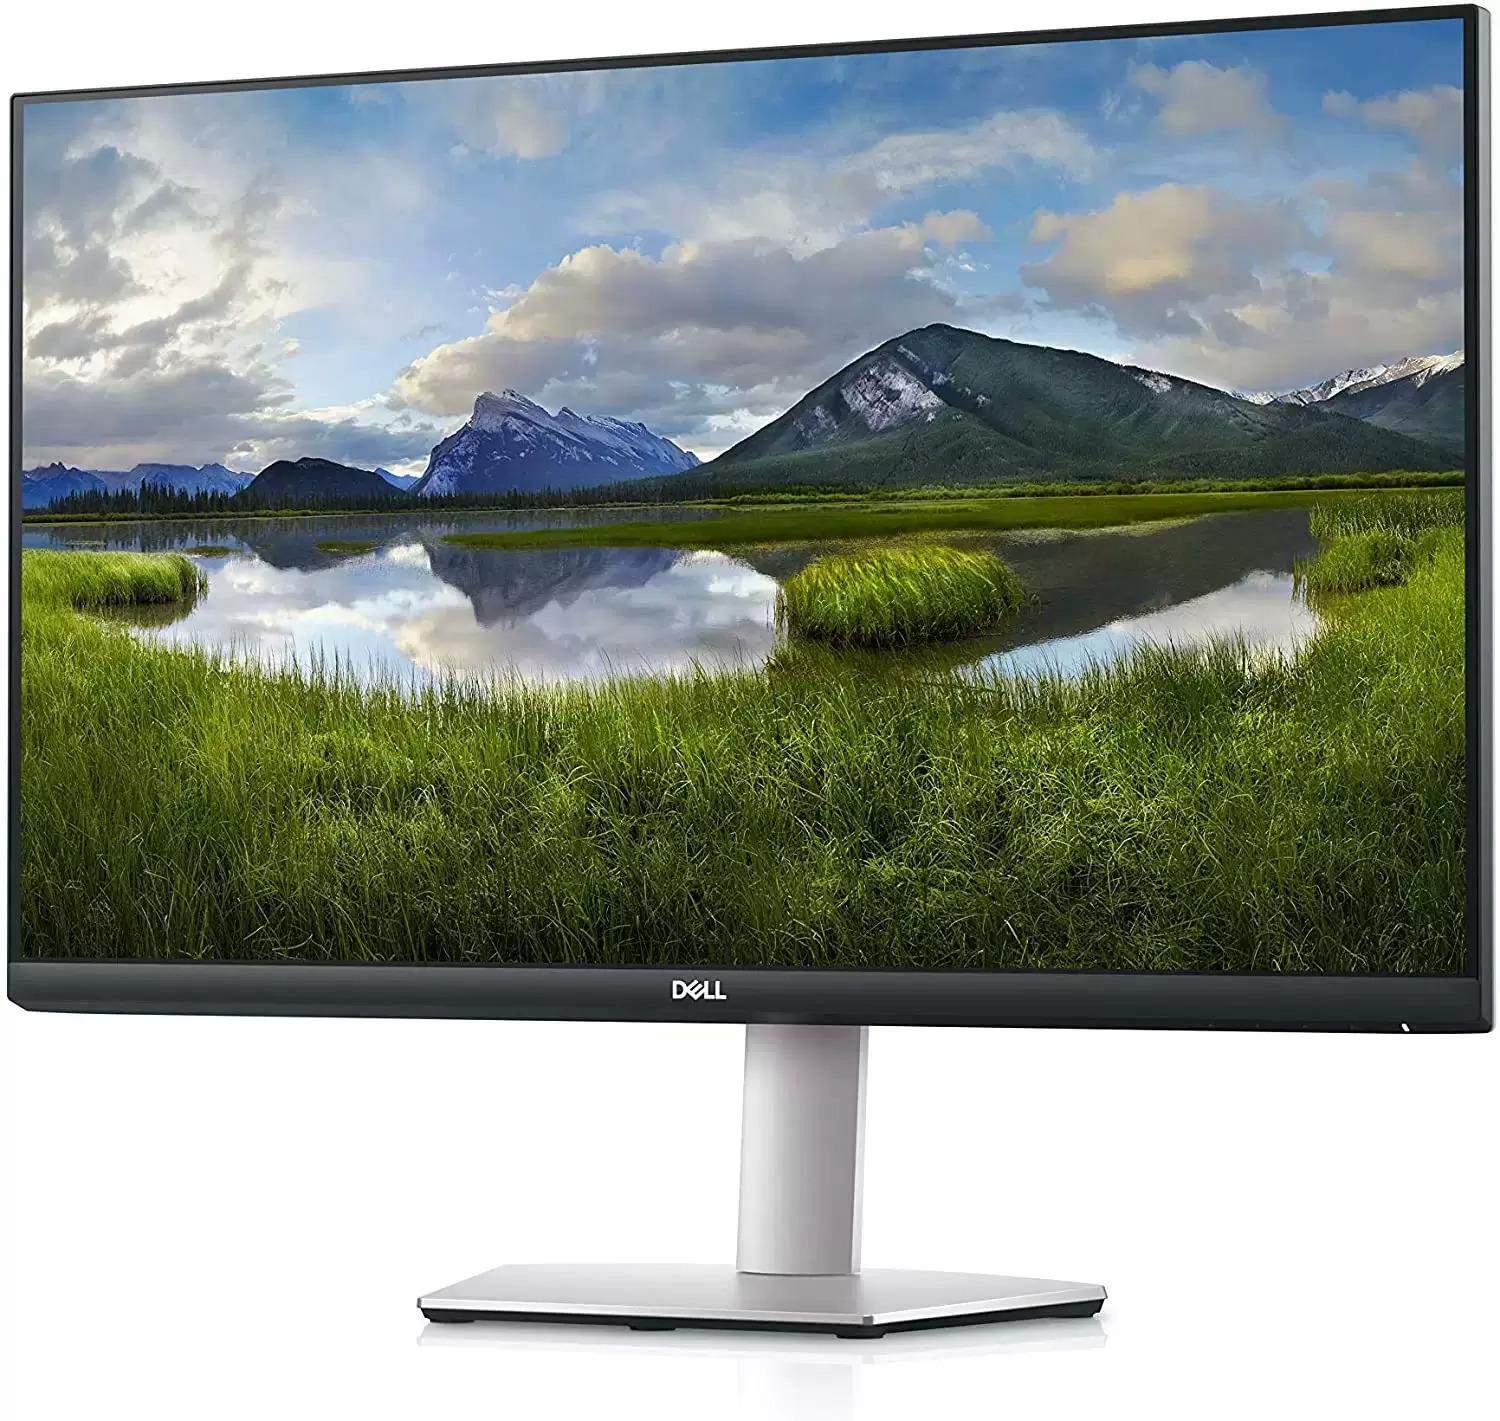 Dell 27in S2721QS 4K UHD Monitor with $100 Gift Card for $349.99 Shipped